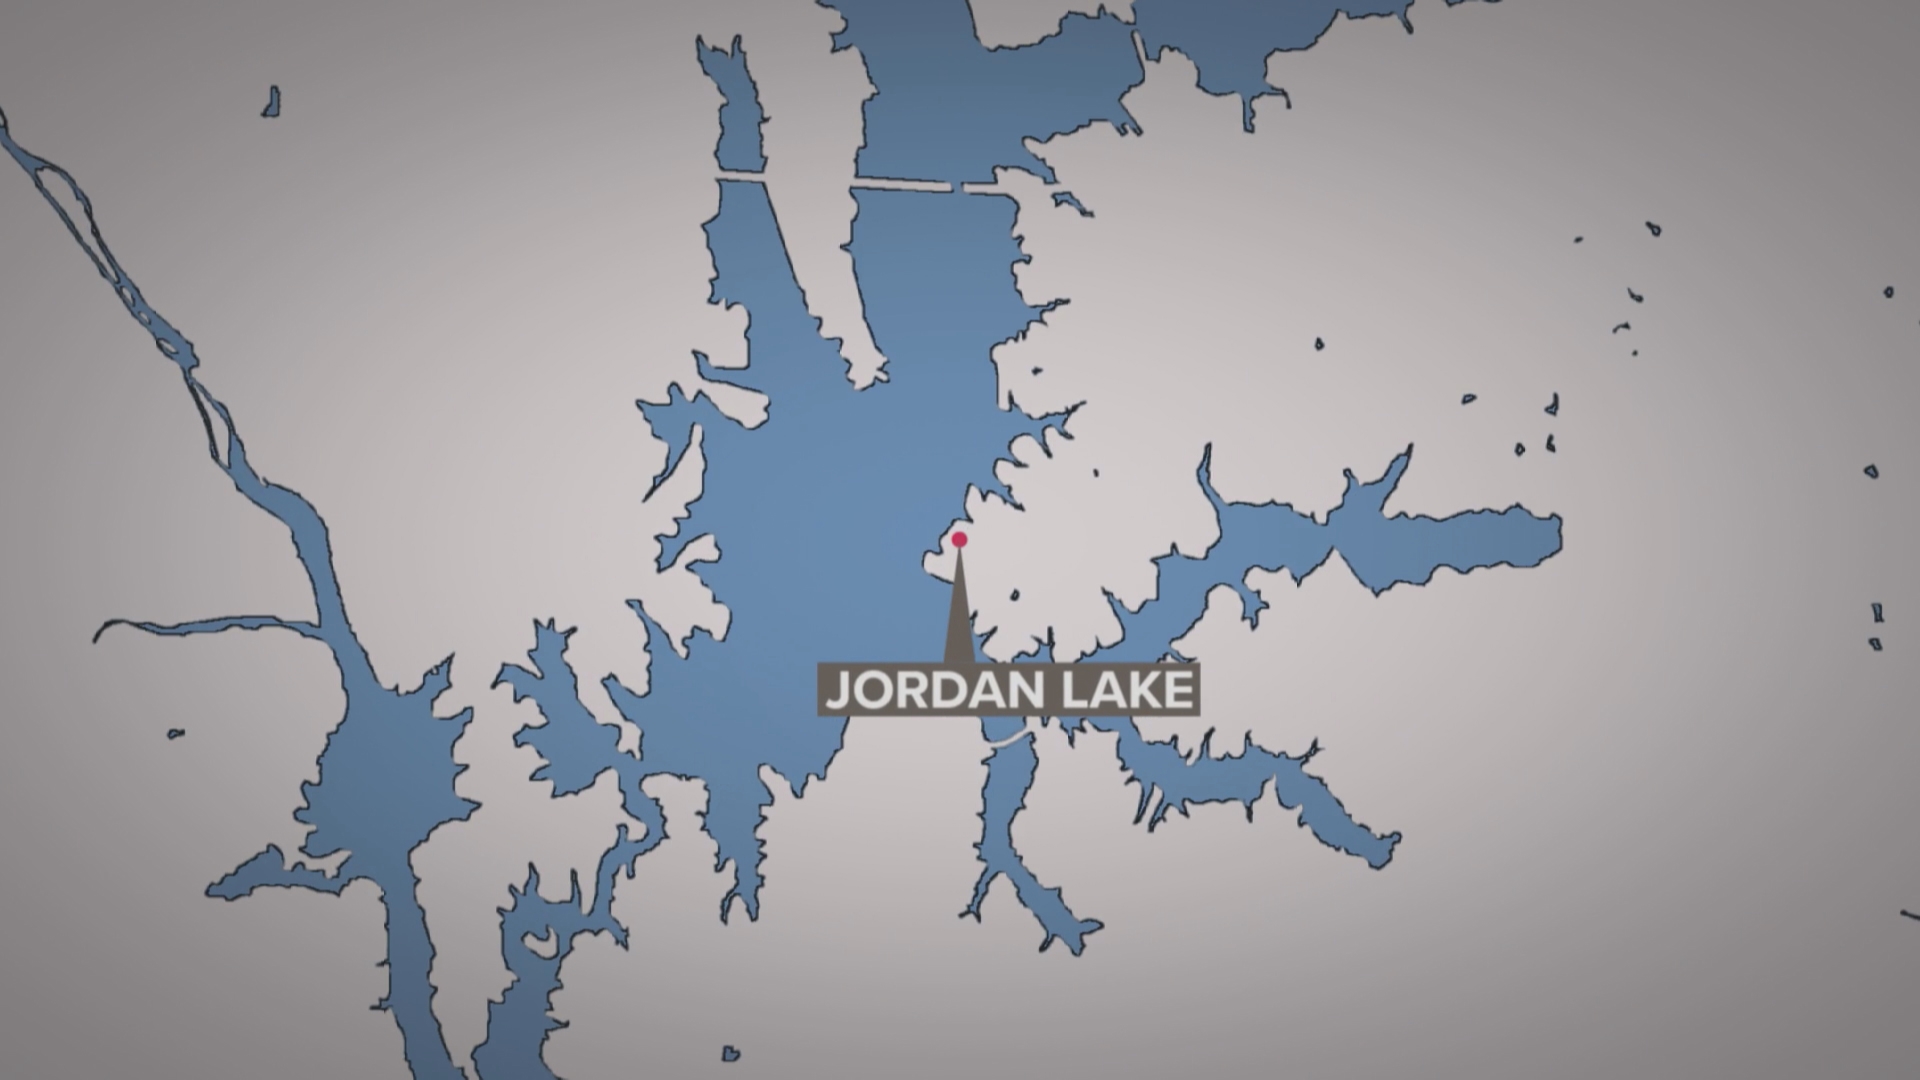 Deputies said the teen was swimming in a non-designated swimming area.